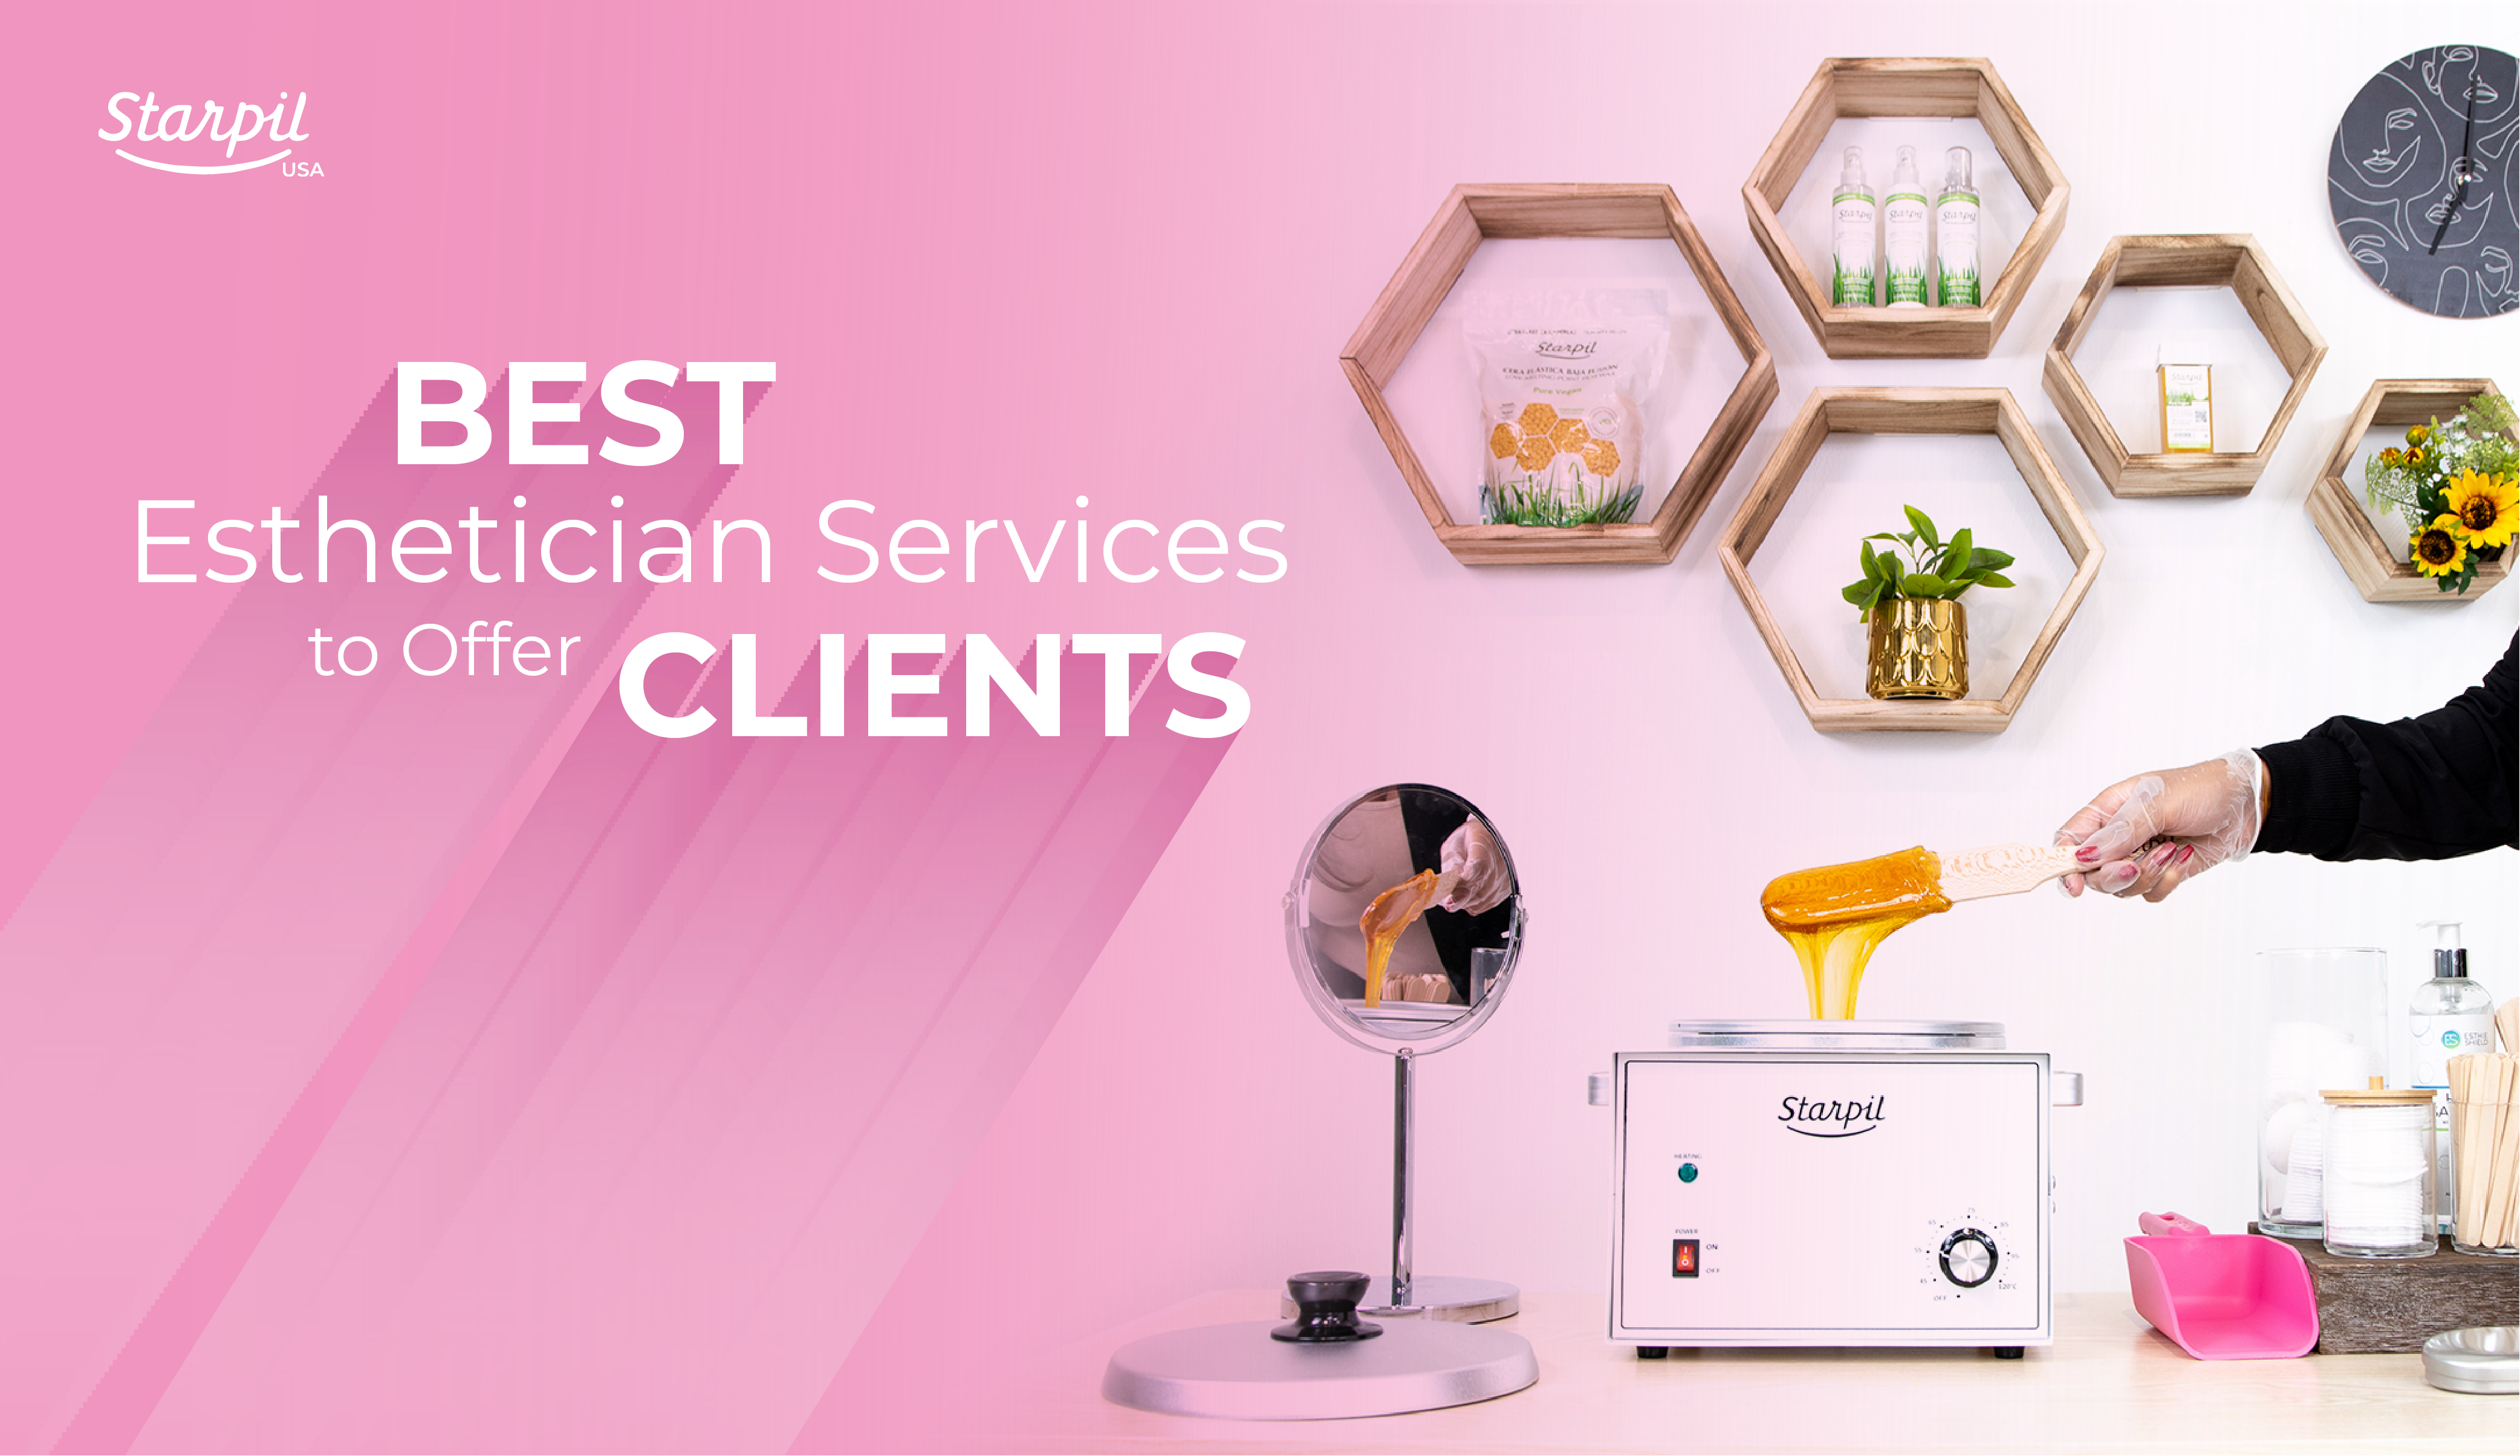 Best Esthetician Services to Offer Clients